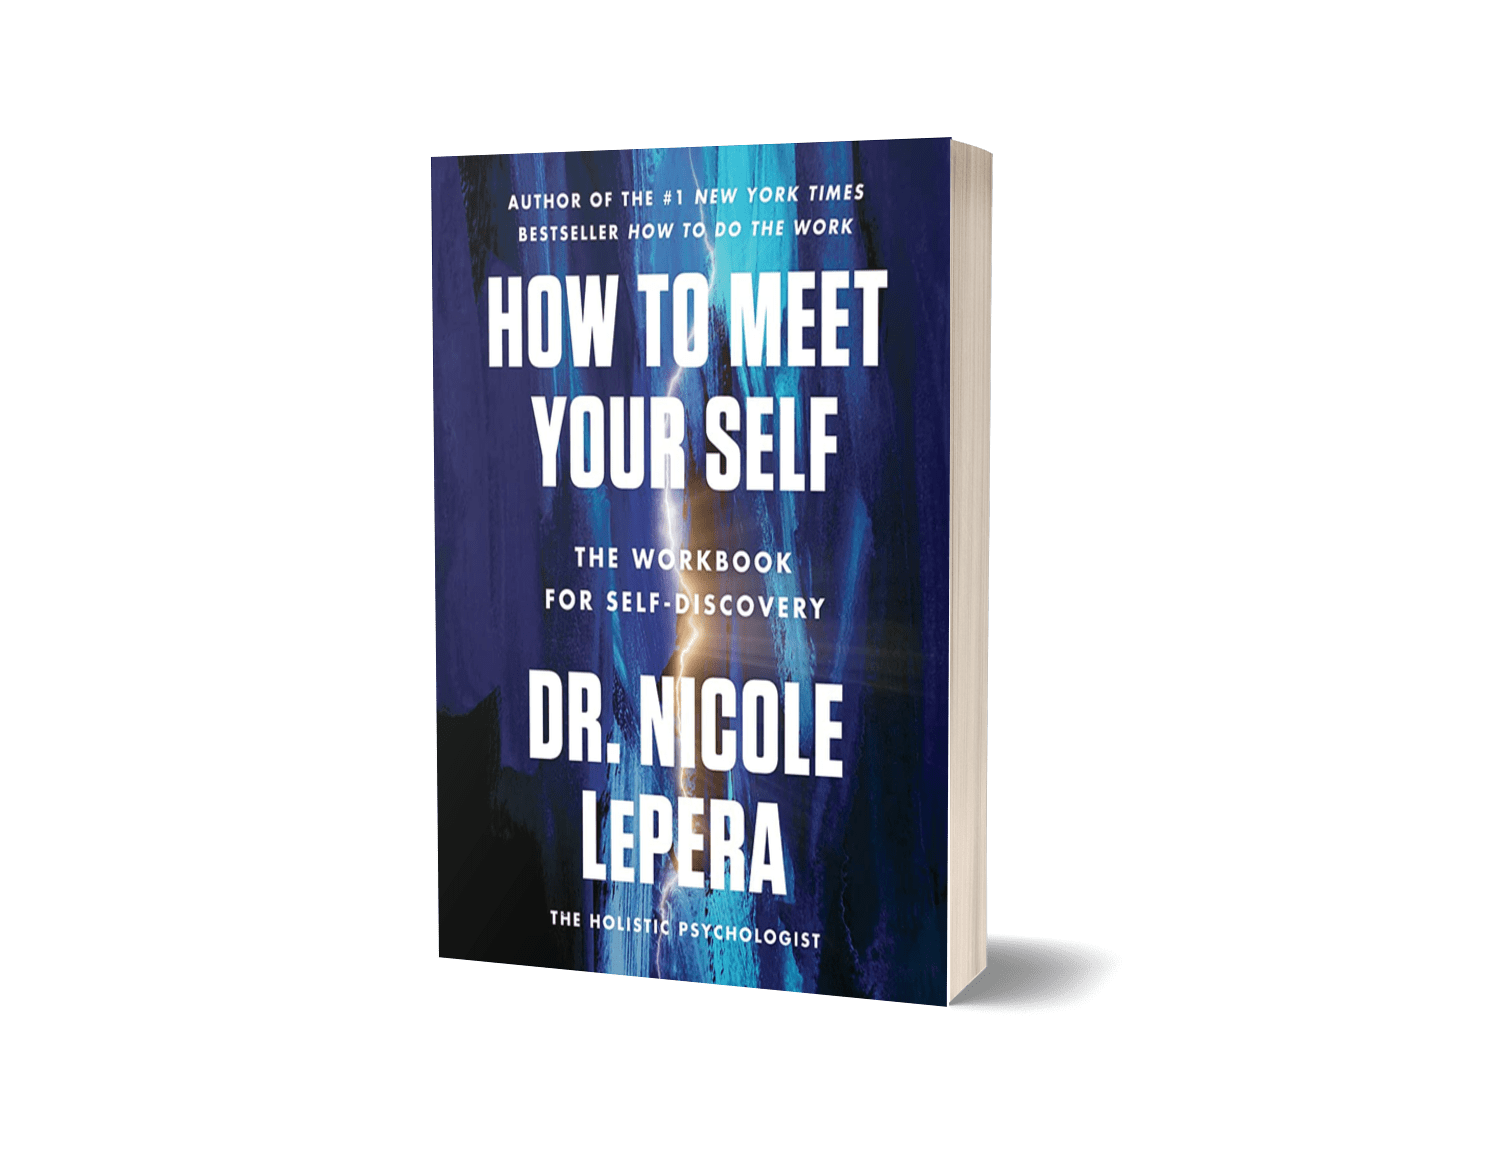 How to meet Your Self by Dr. Nicole Lepera